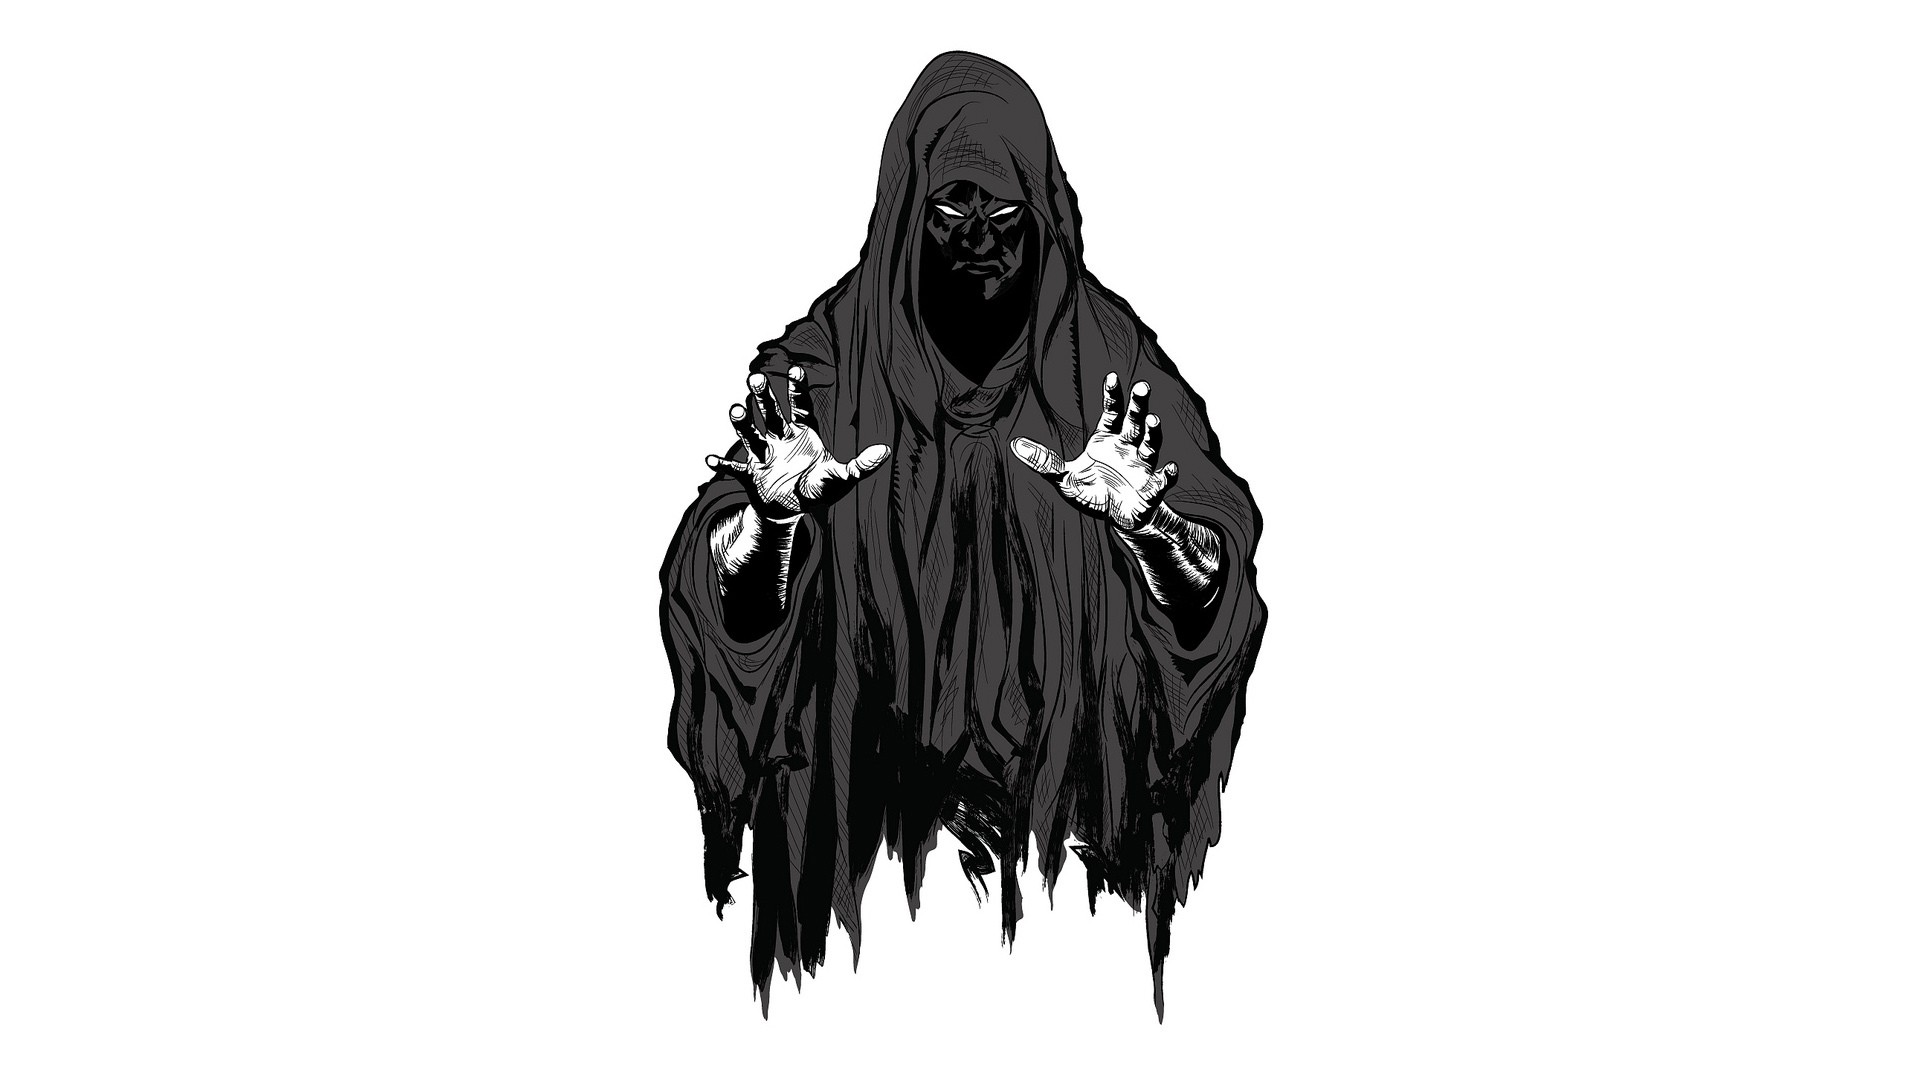 General 1920x1080 Grim Reaper fantasy art simple background white background frontal view